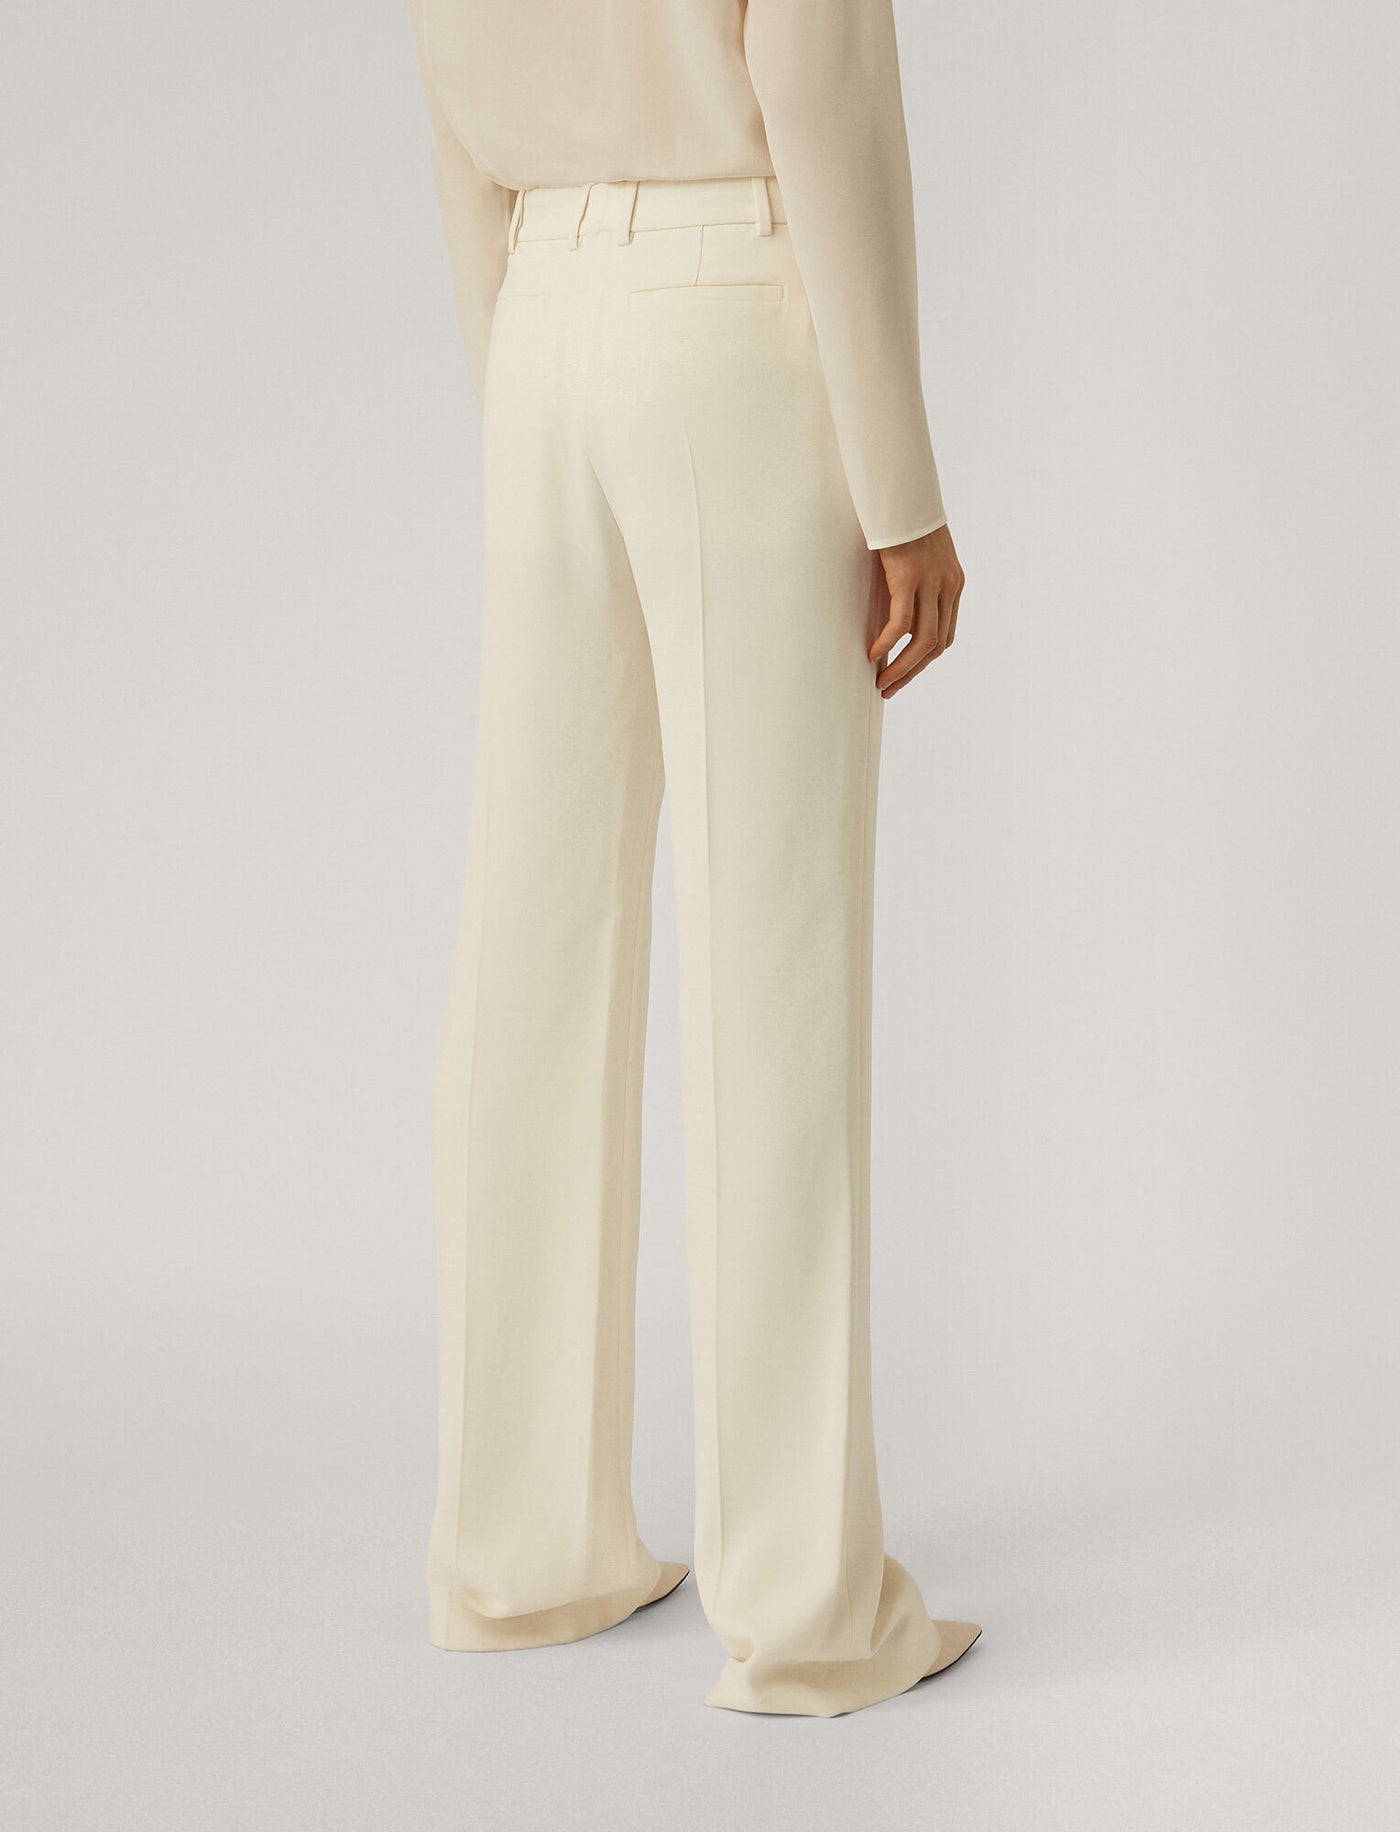 Joseph - Morissey trousers in new cady